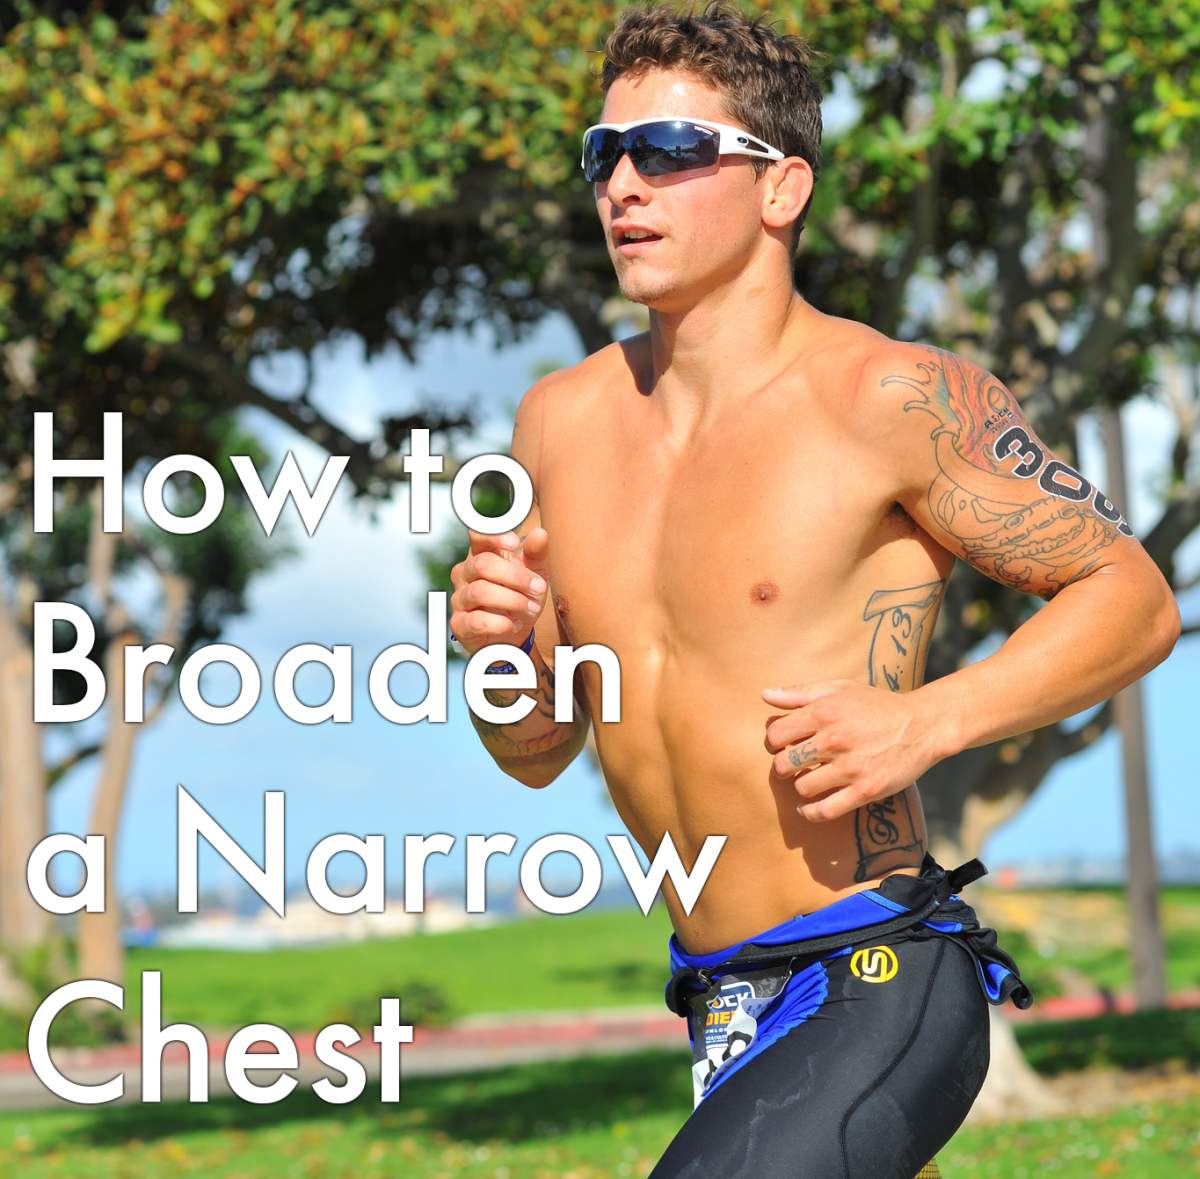 Three steps for broadening a narrow chest.